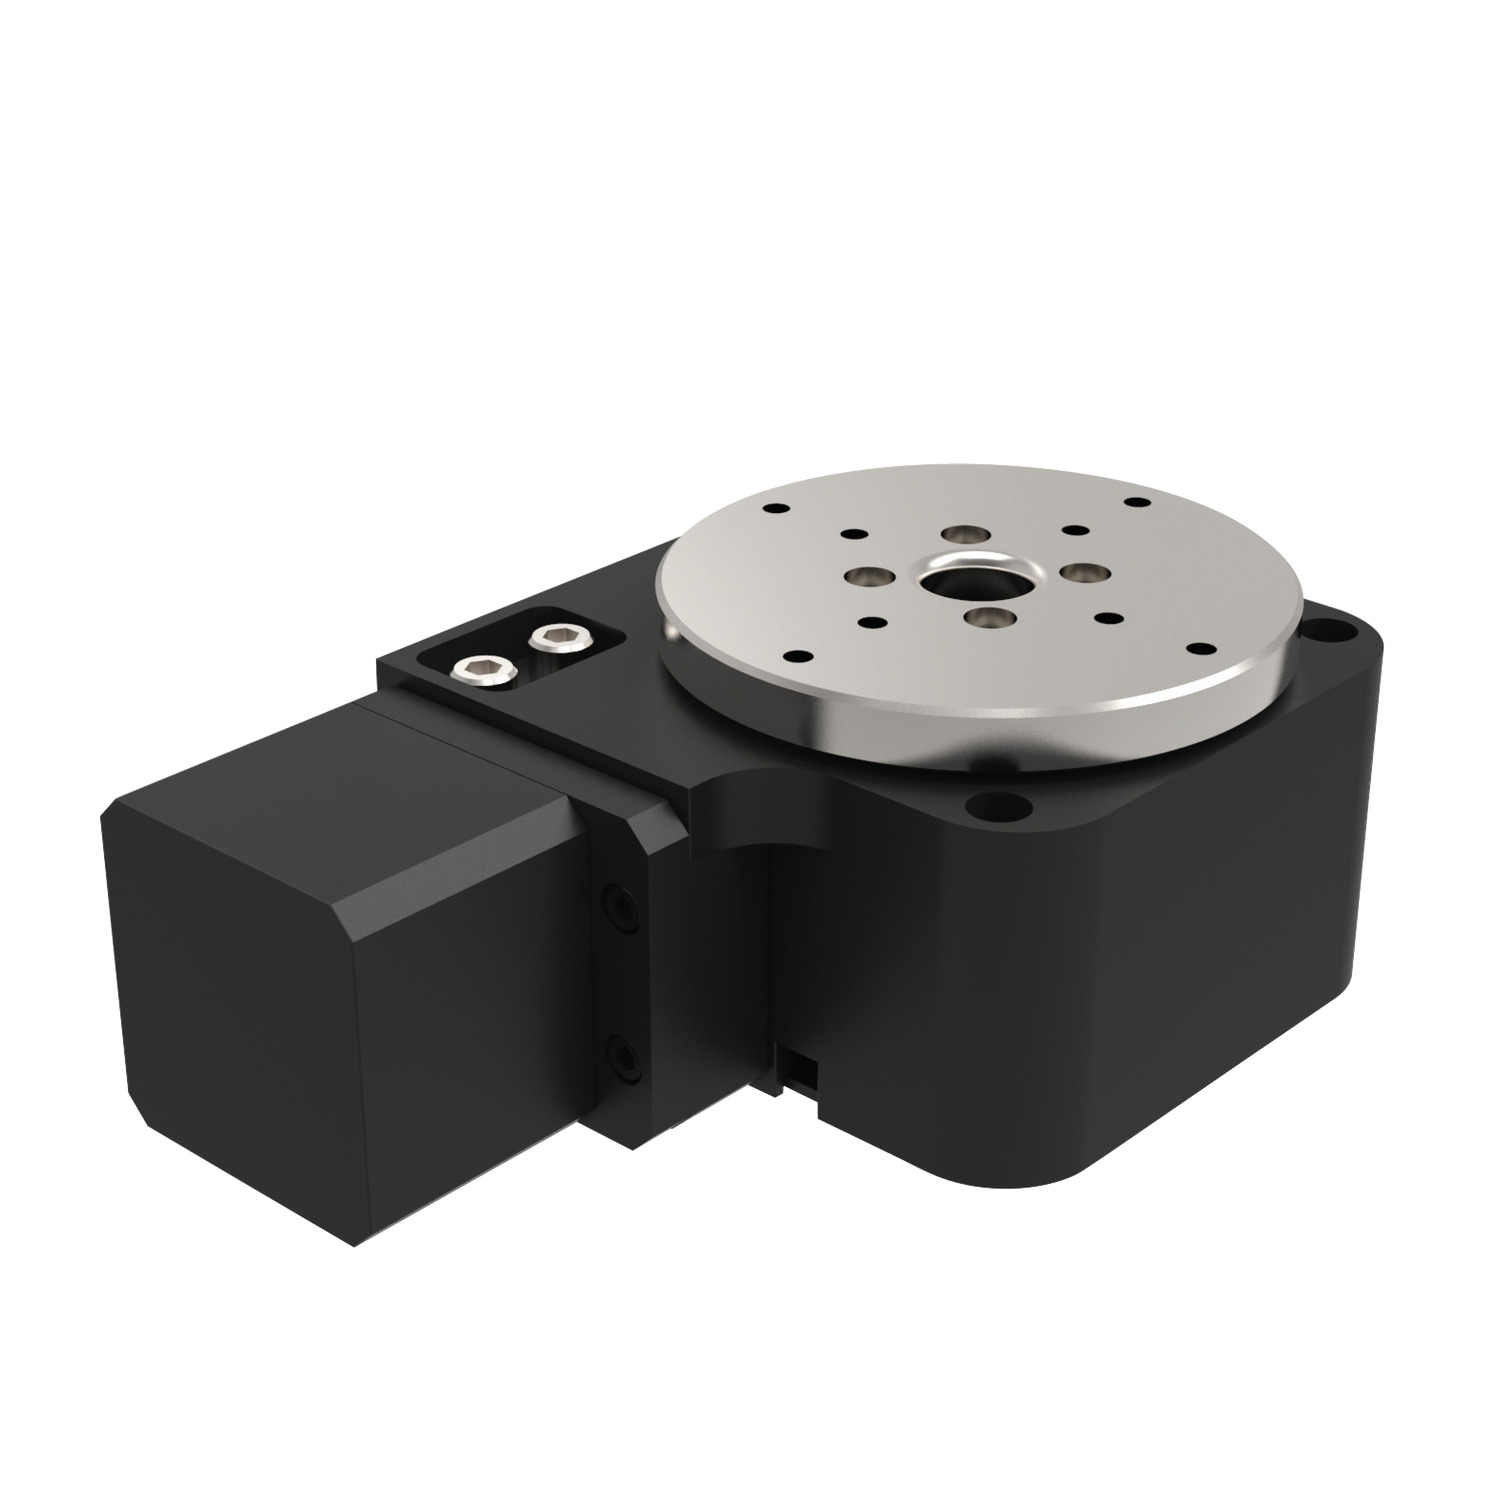 Motorised Rotary Stages Ø75 Motorised rotary tables have the same features and capabilities as our plug and play motorised linear stages. 50mm dia up to 200mm dia including a fully submersible rotary stage.